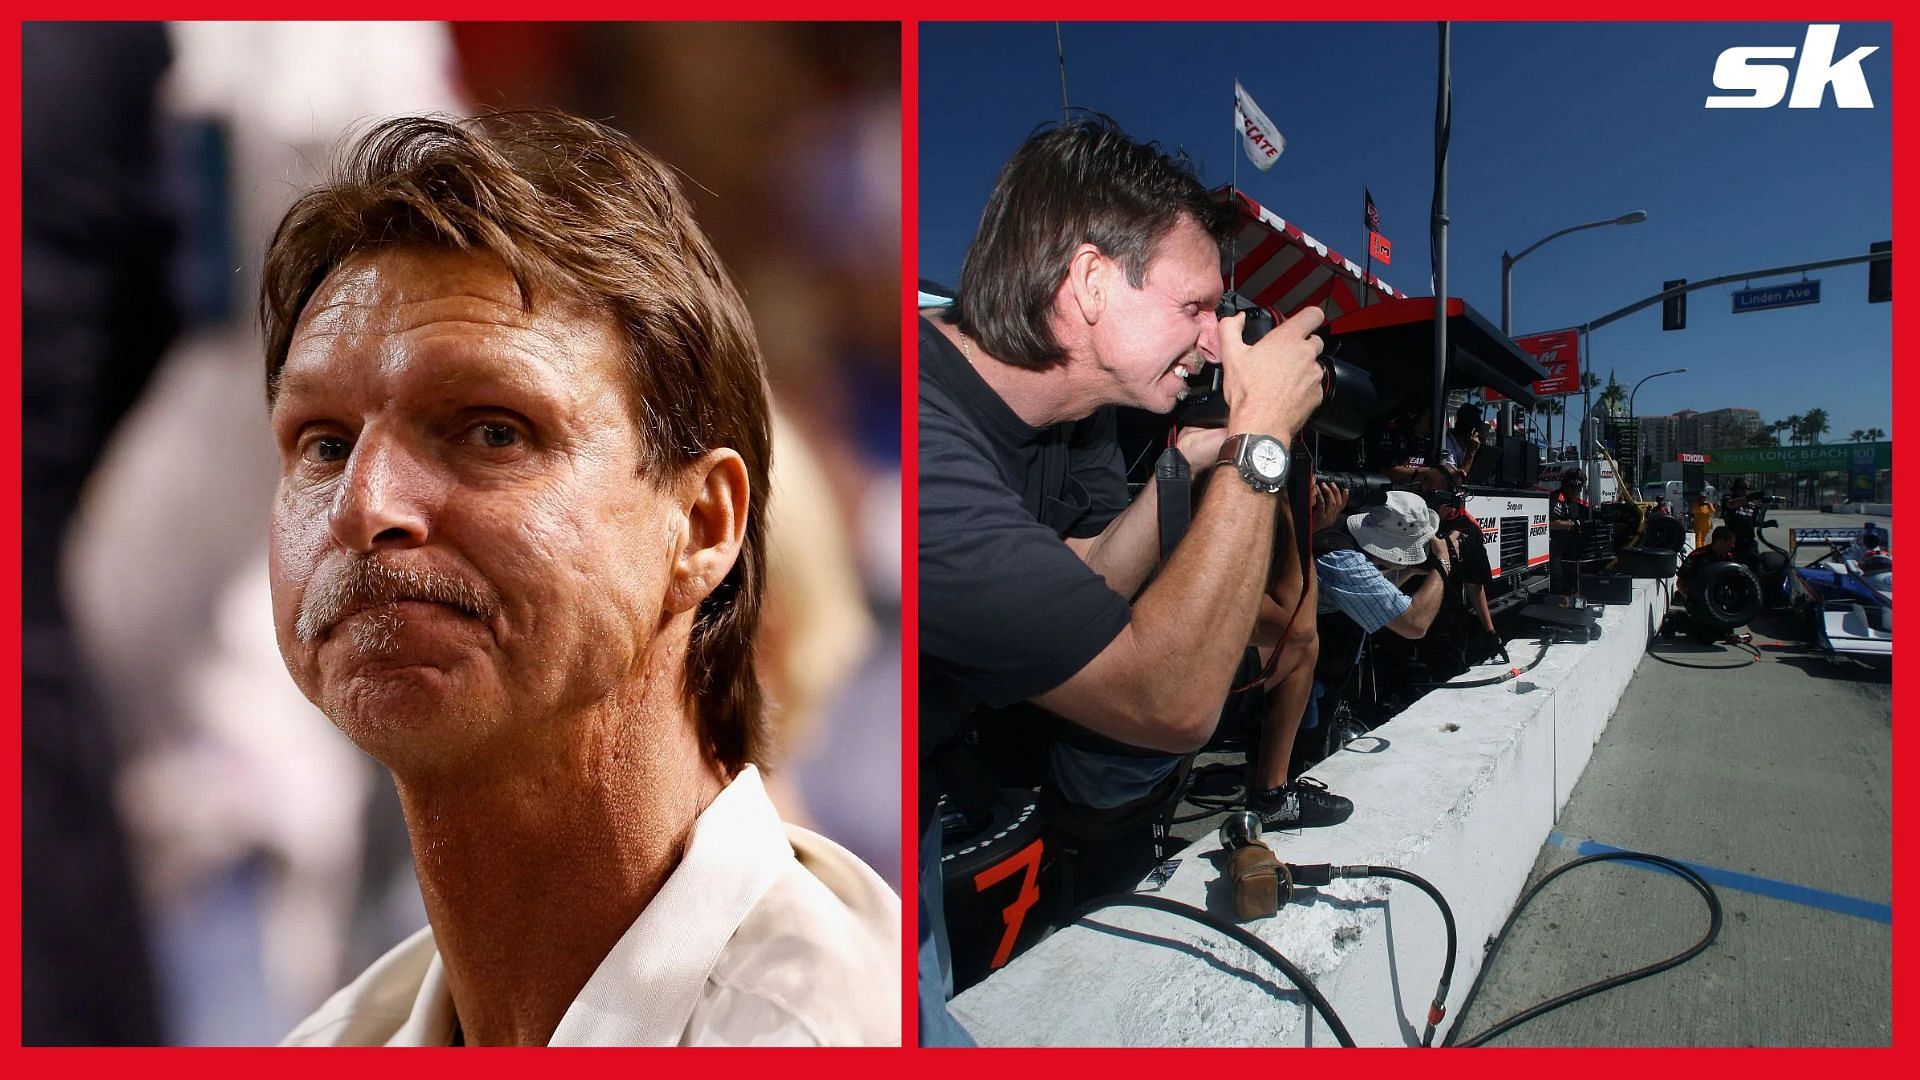 MLB Legend Randy Johnson Now Working Second Career as NFL Photographer